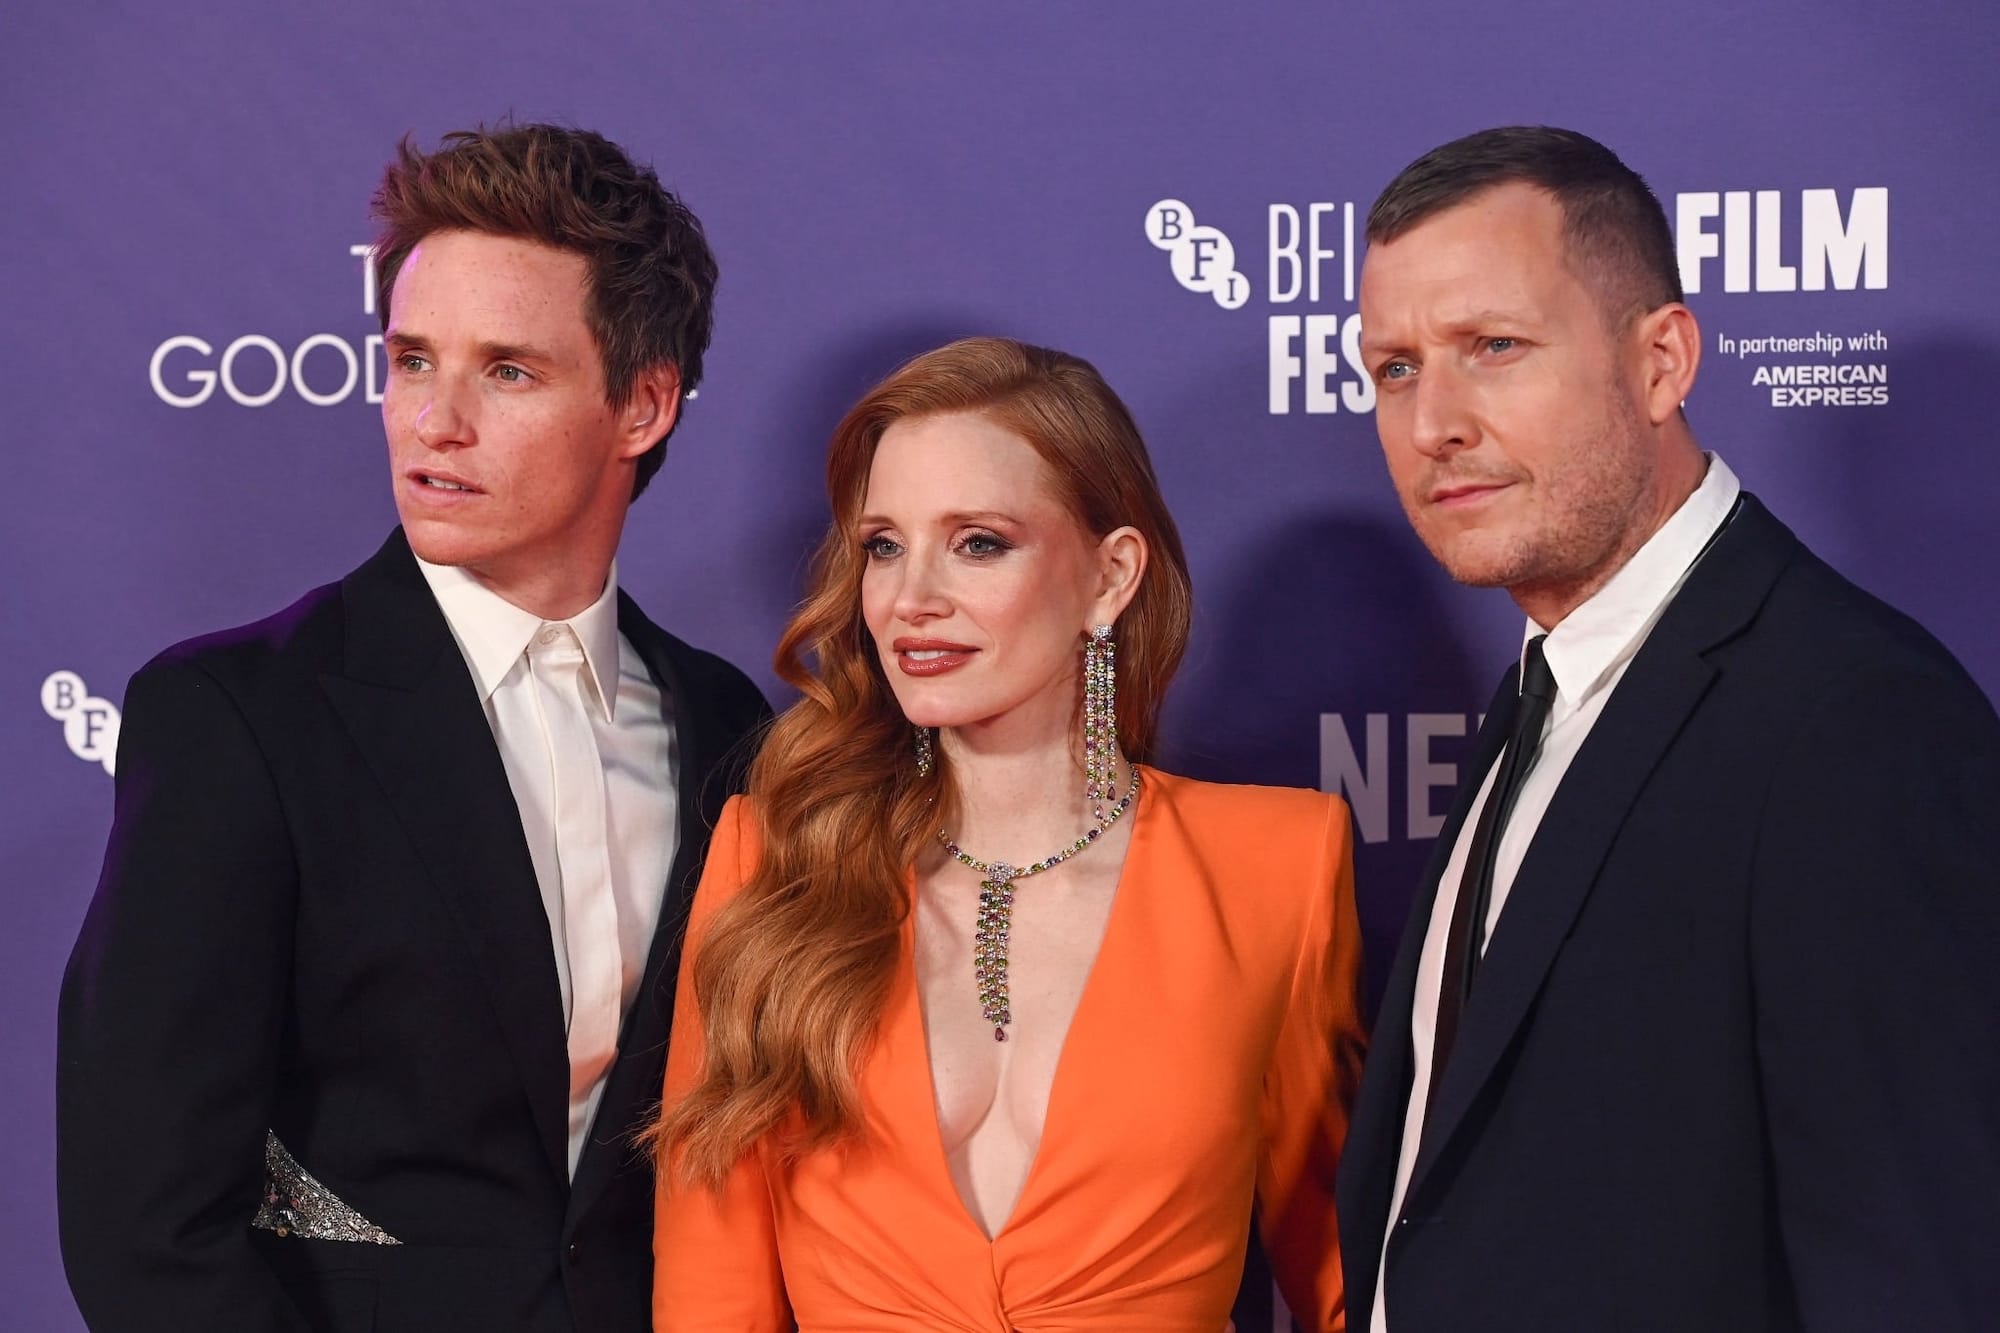 Eddie Redmayne With co-star Jessica Chastain and director Tobias Lindholm.